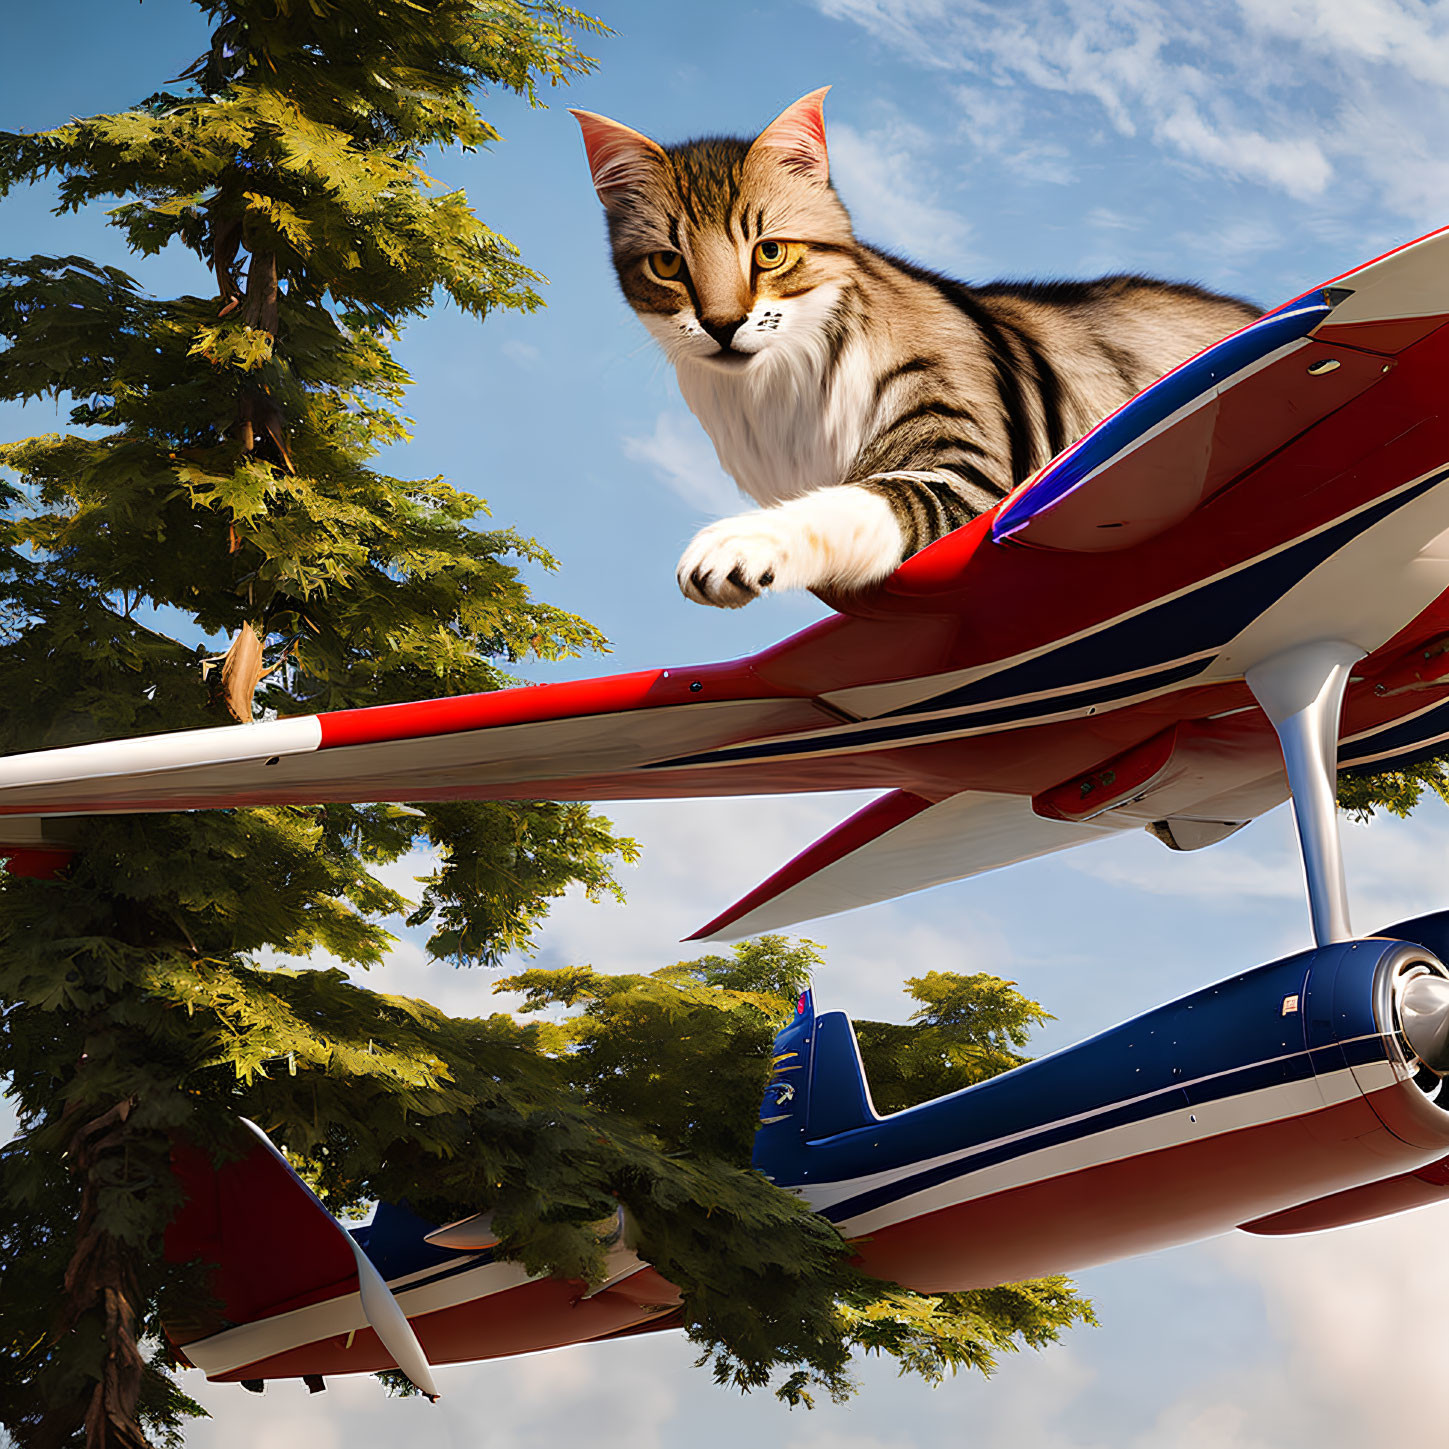 Tabby Cat Sitting on Model Airplane in Nature Scene